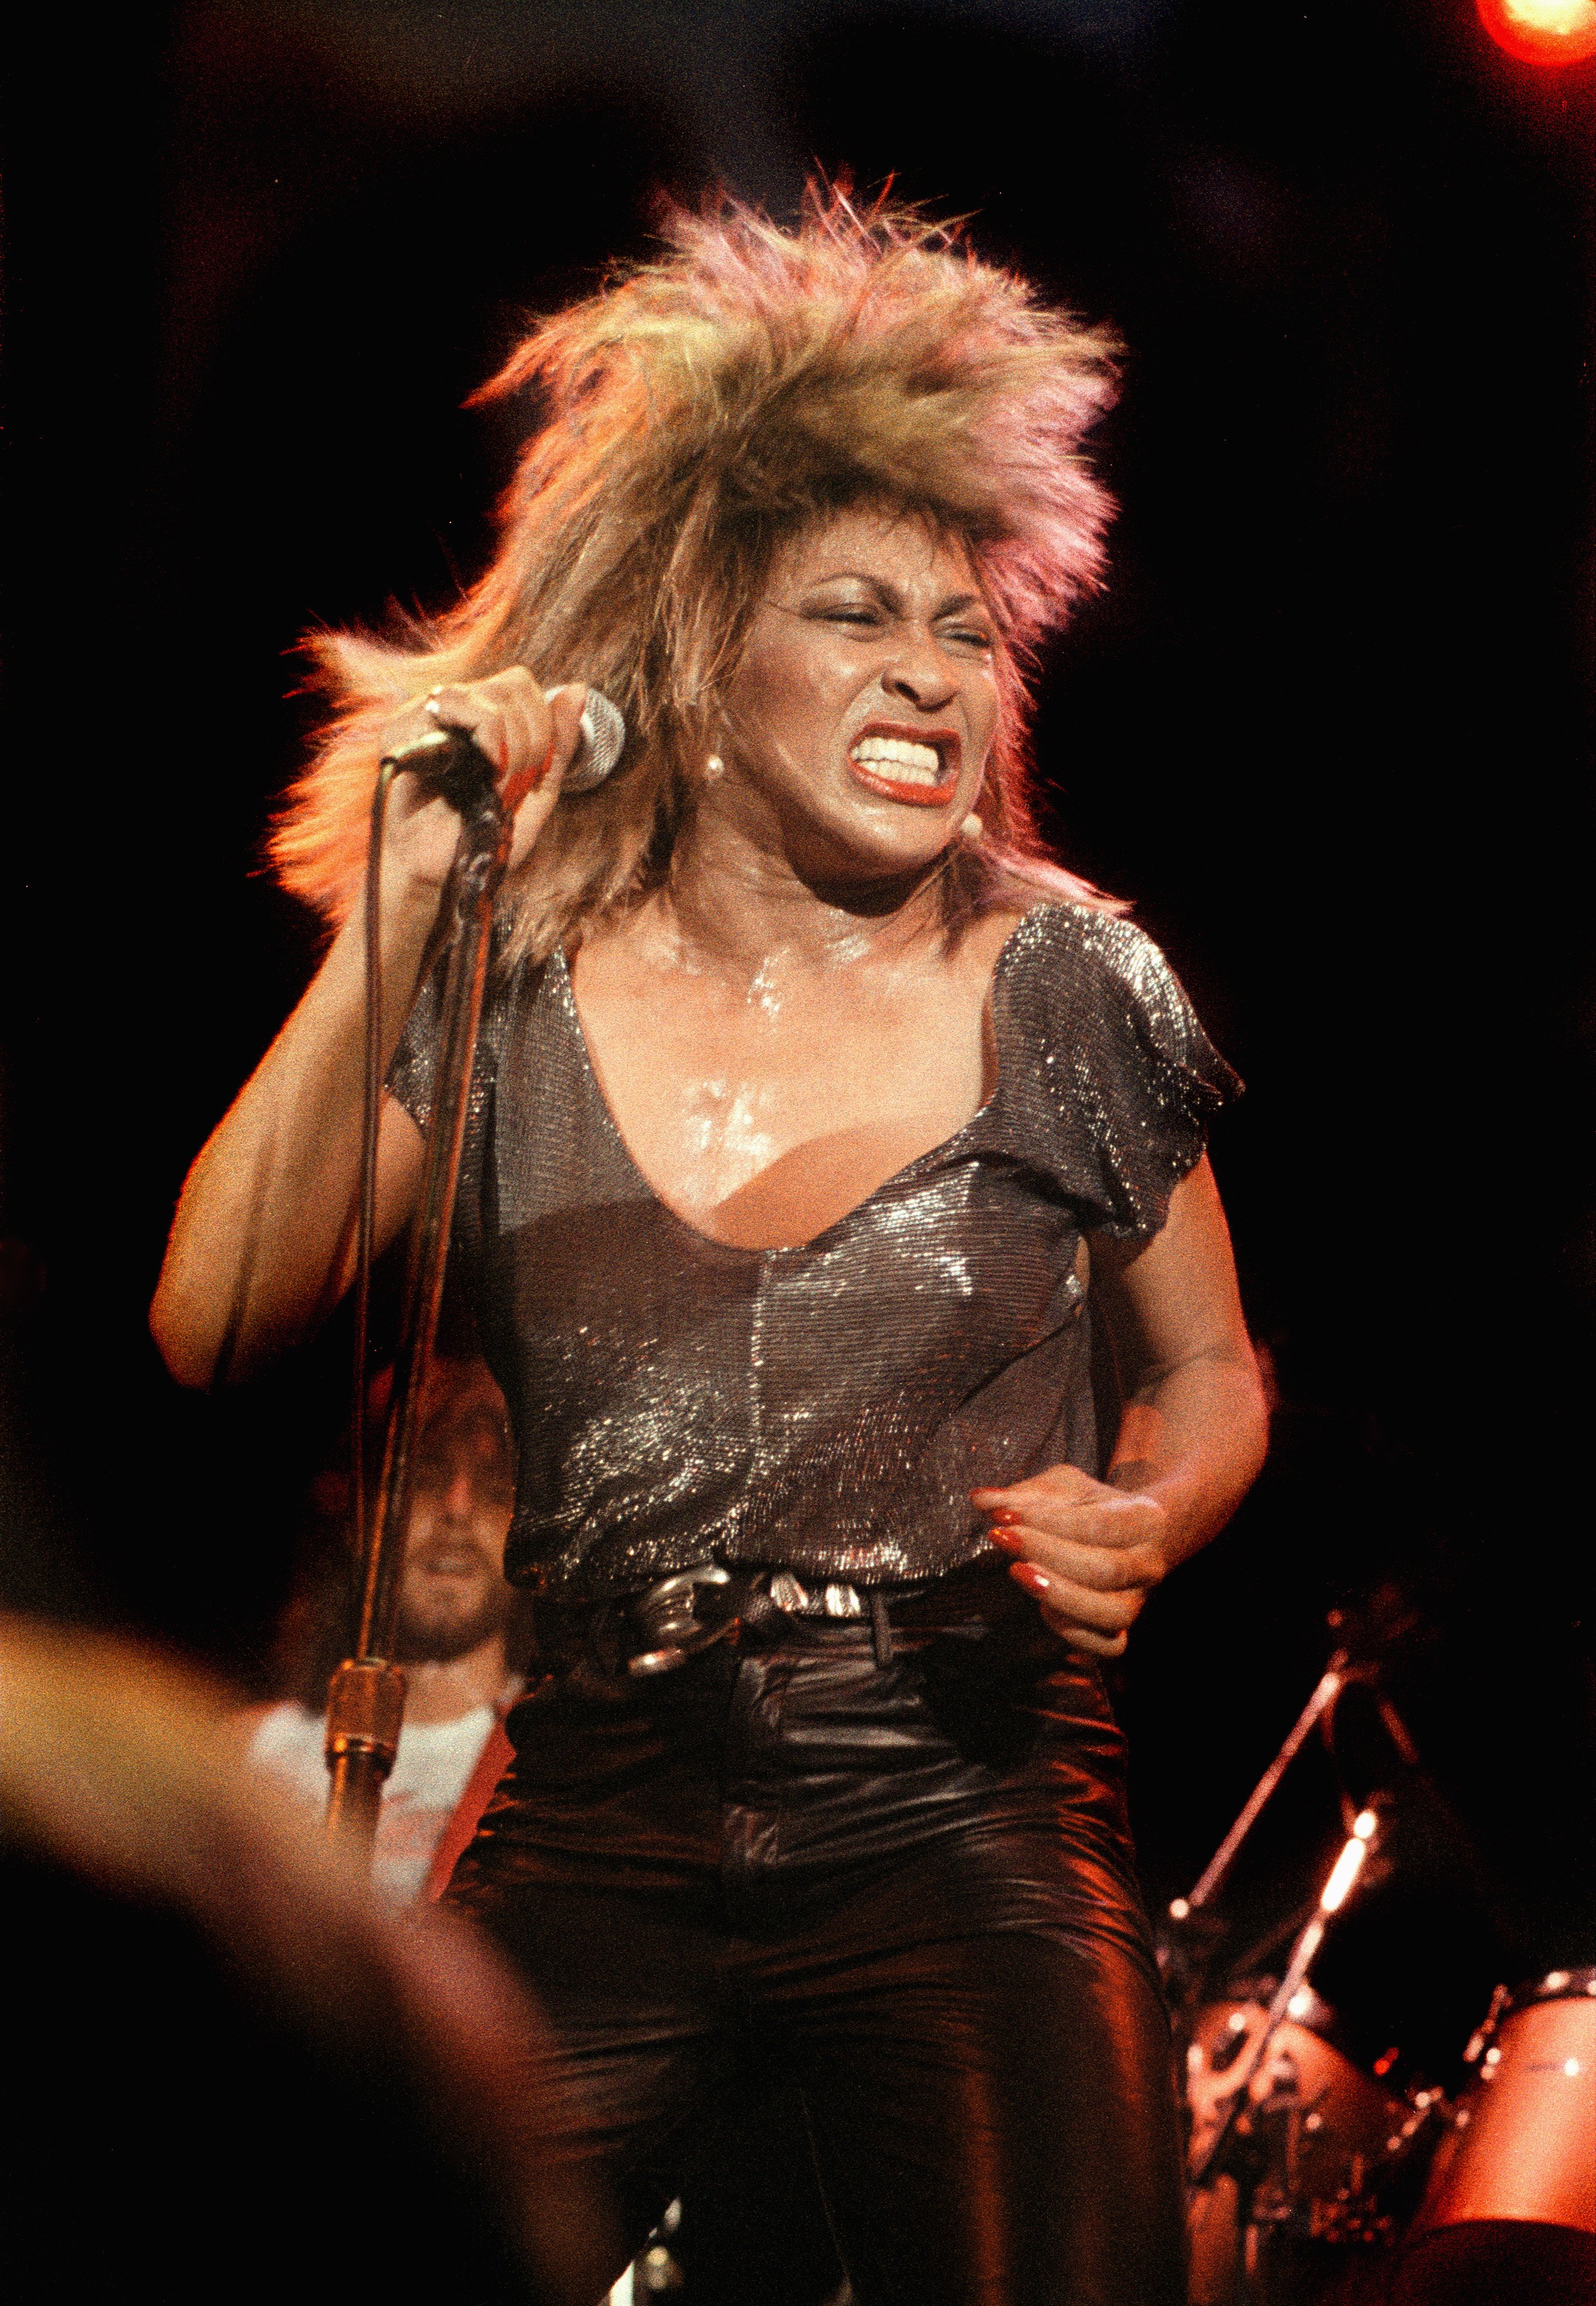 Tina Turner at First Avenue Nightclub in Minneapolis, Minnesota, during her Private Dancer Tour in 1985 | Source: Getty Images